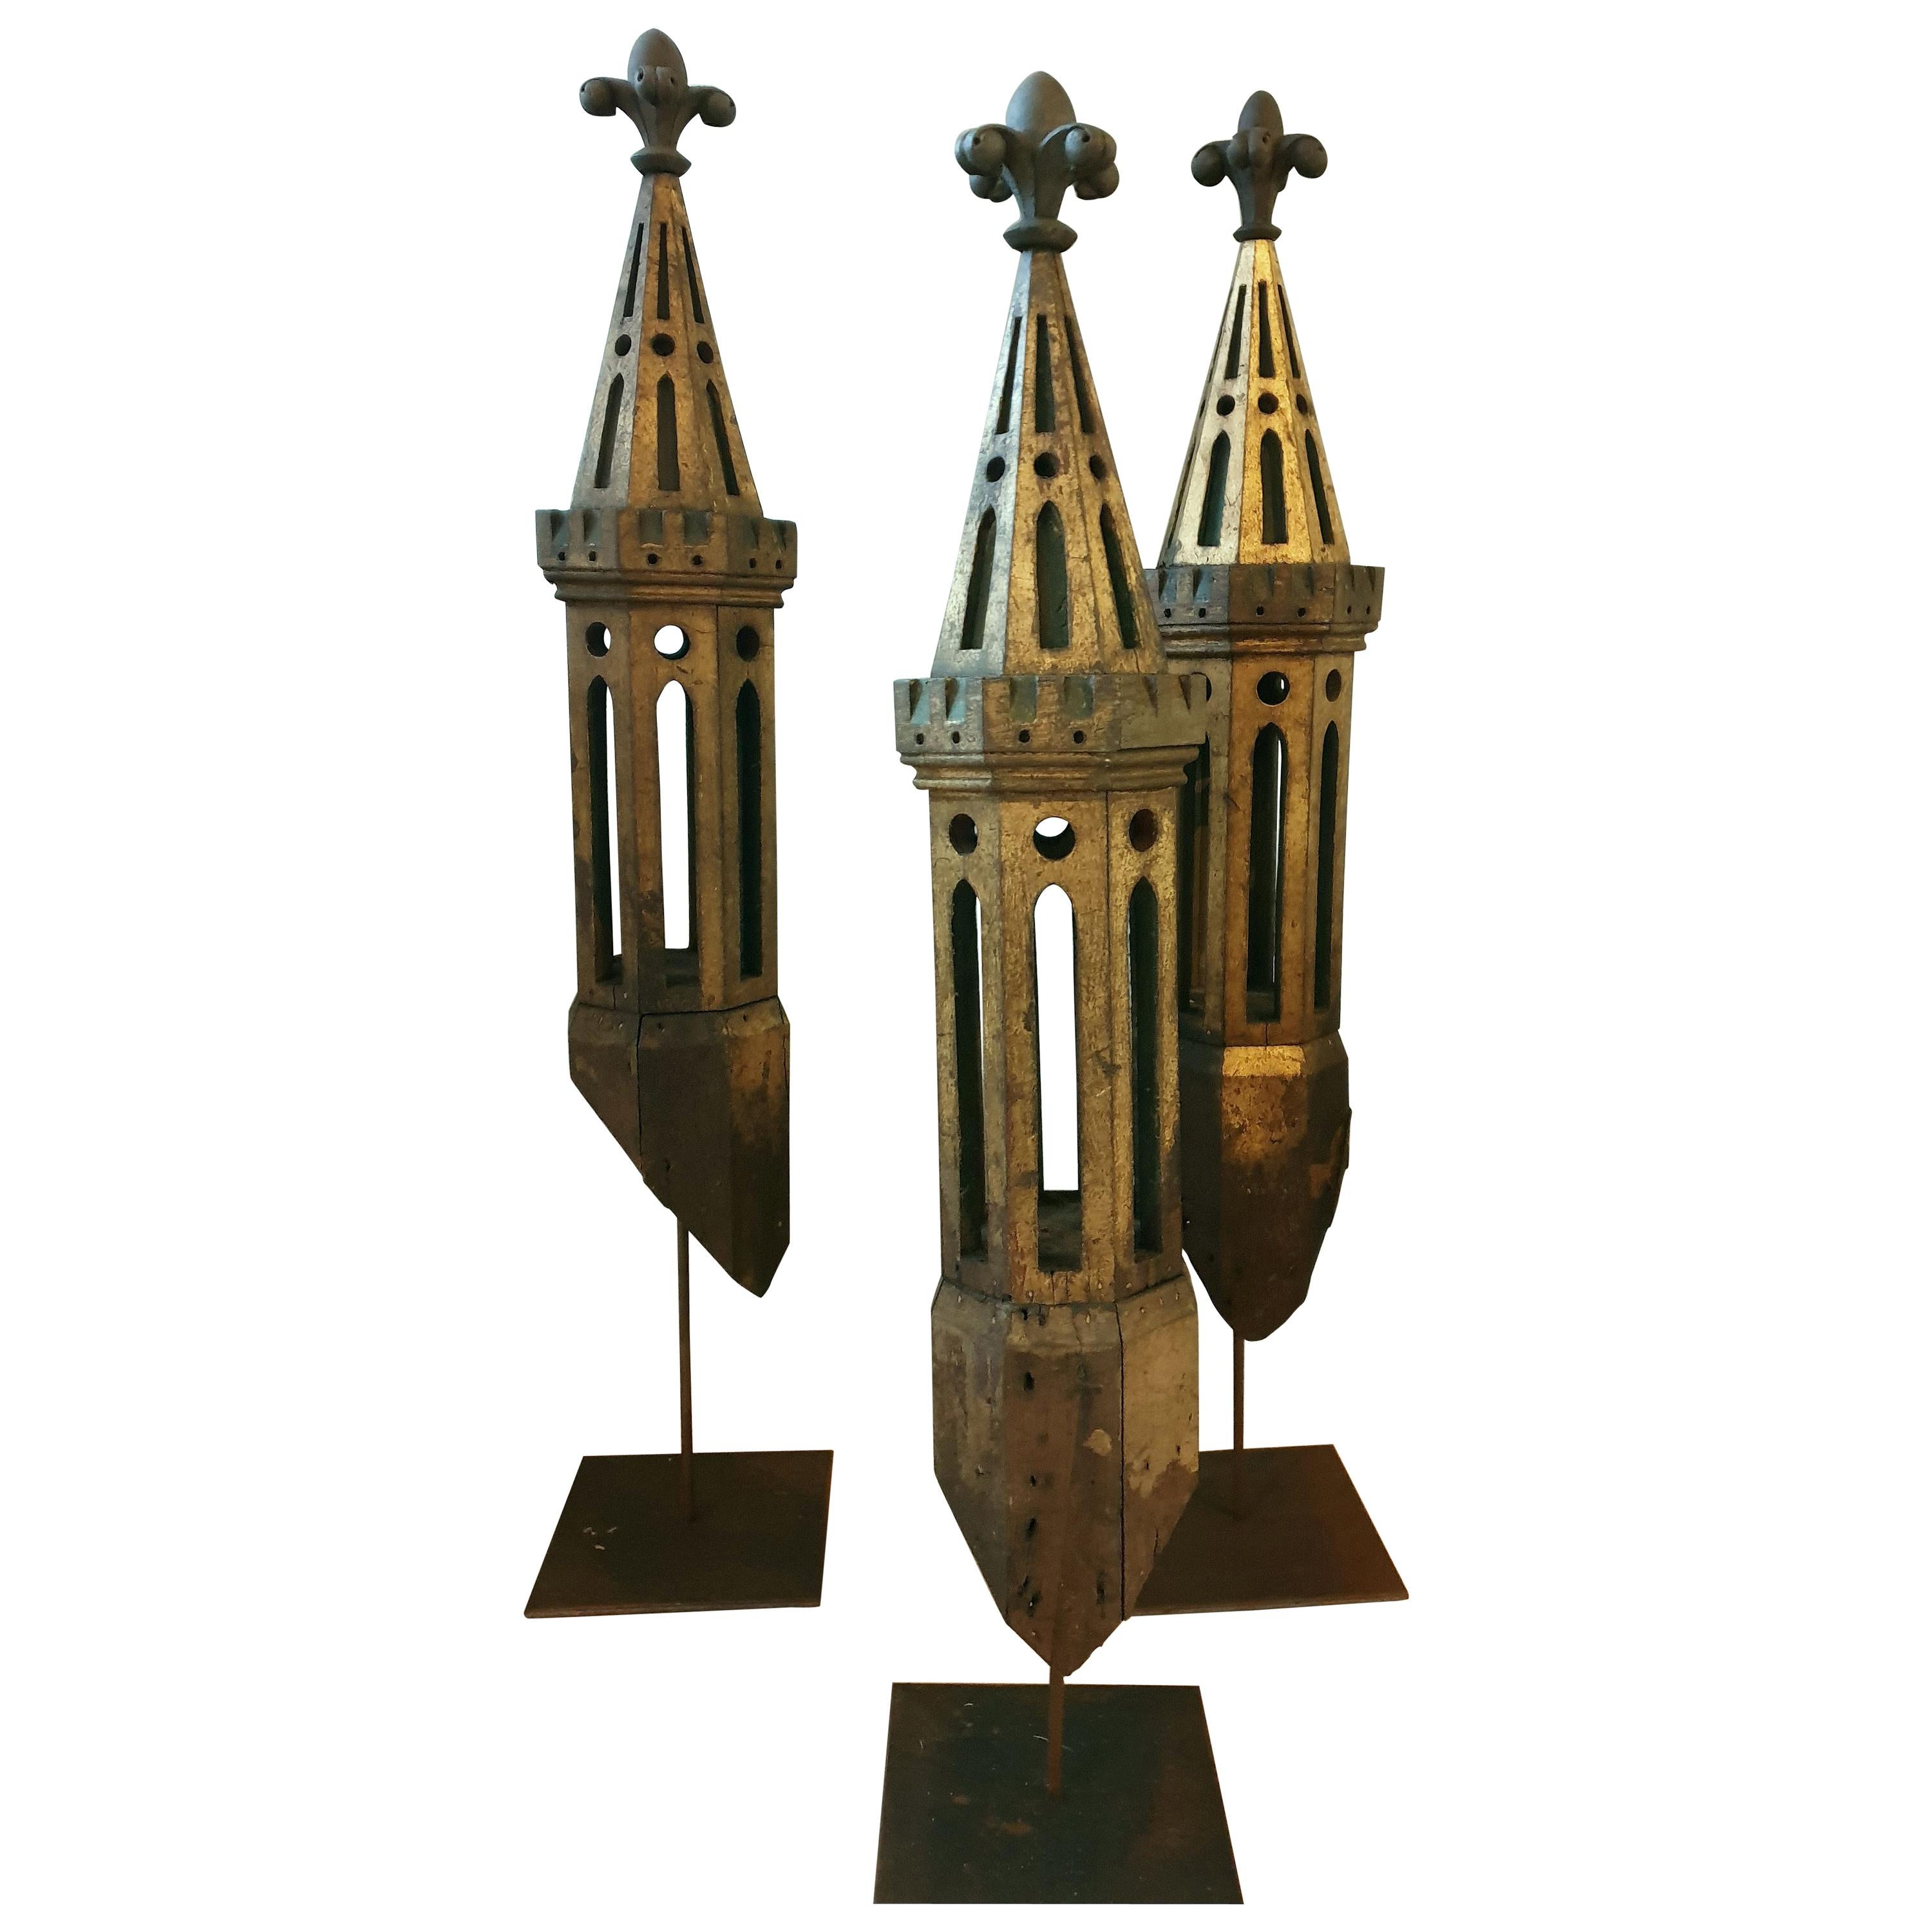 3 Decorative Architectural Church Tower Models For Sale